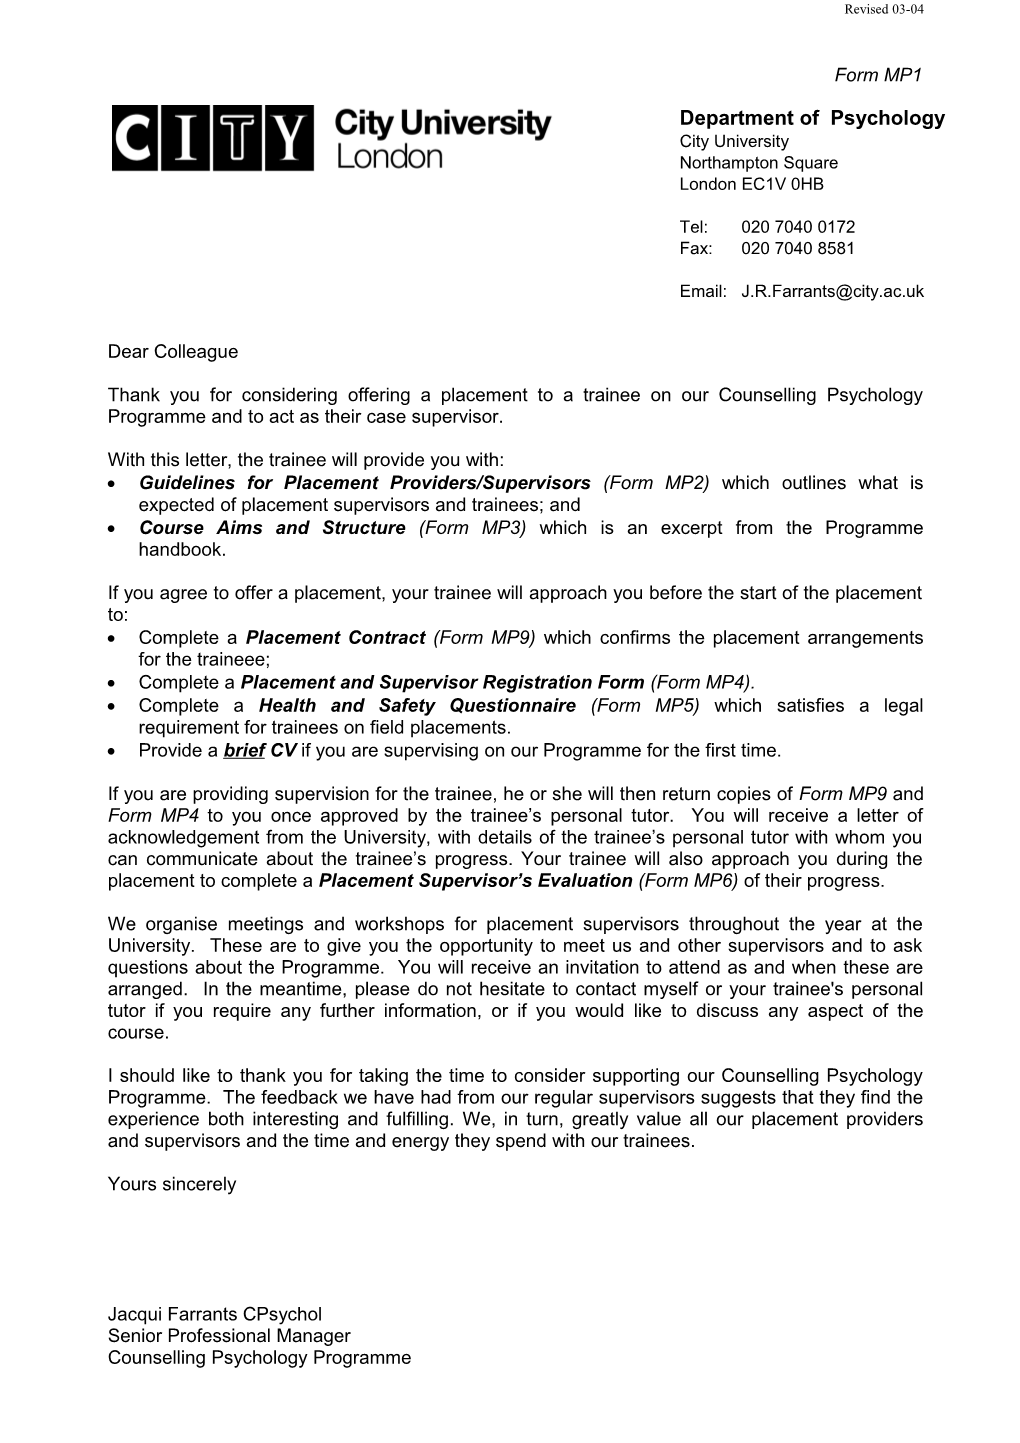 City University - MP1 - Letter to Placement Provider / Supervisor